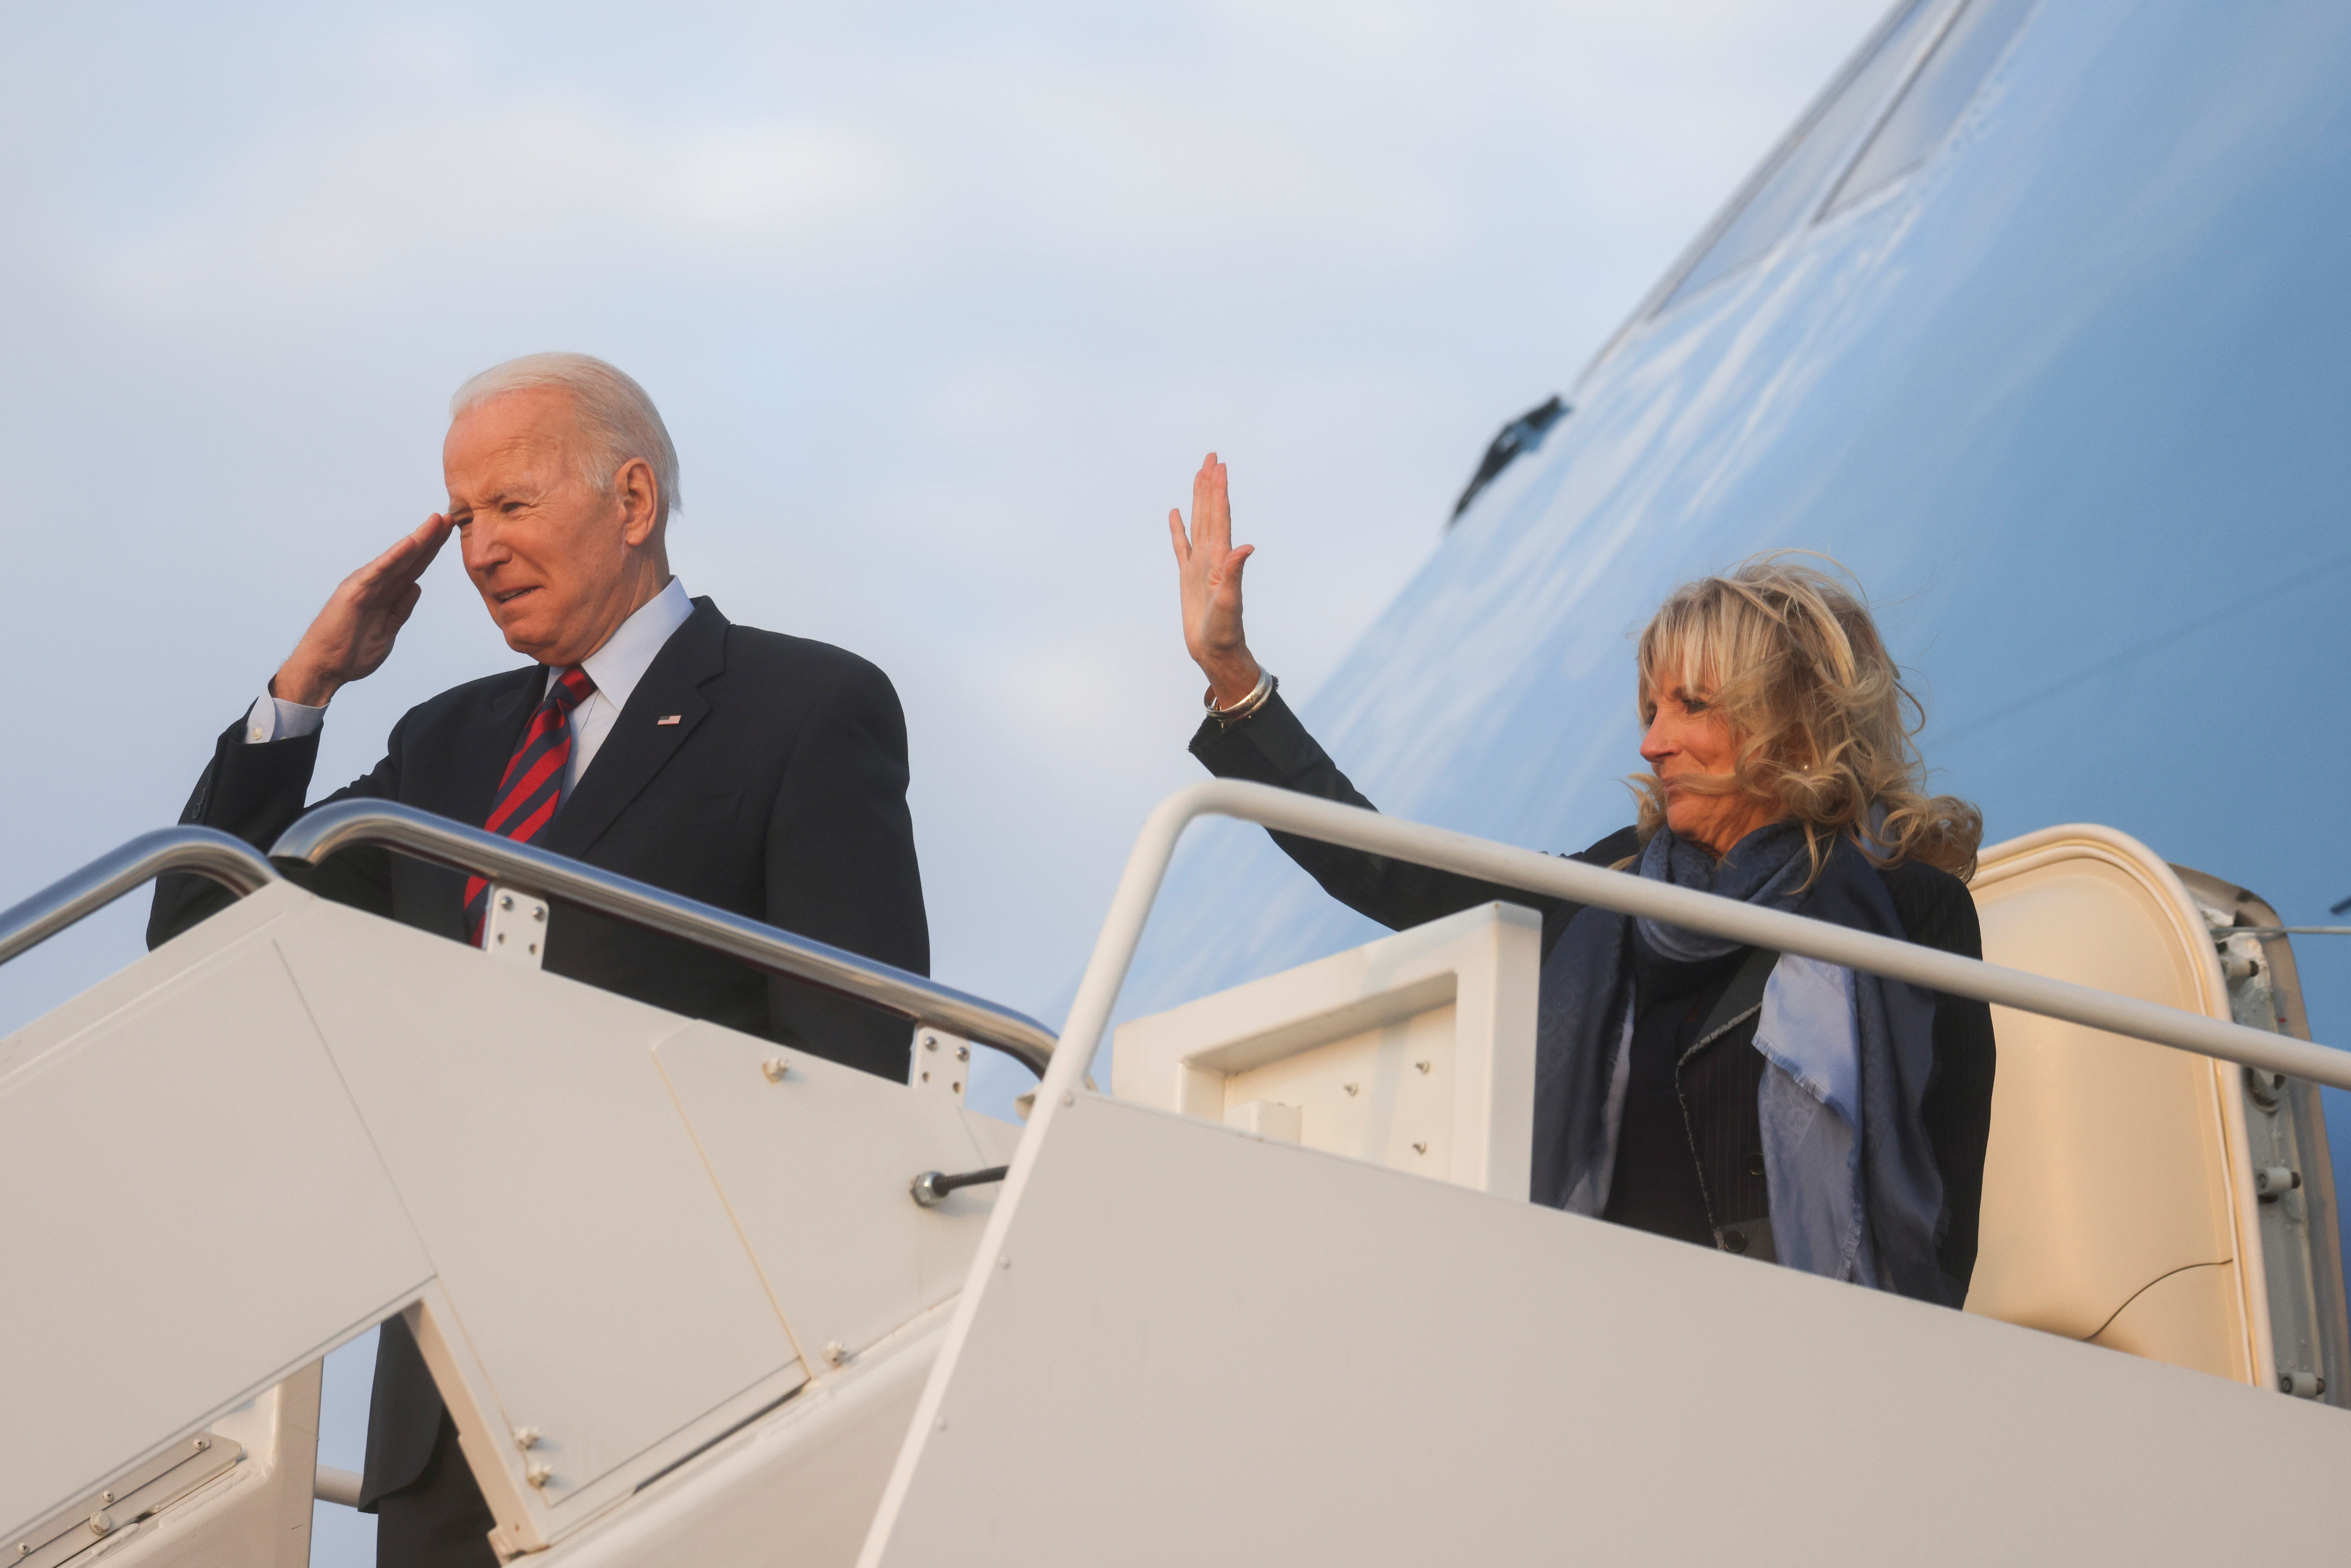 U.S. President Joe Biden and first lady Jill Biden gesture as they board Air Force One to travel to Fort Bragg from Joint Base Andrews, Maryland, U.S., November 22, 2021. REUTERS/Leah Millis